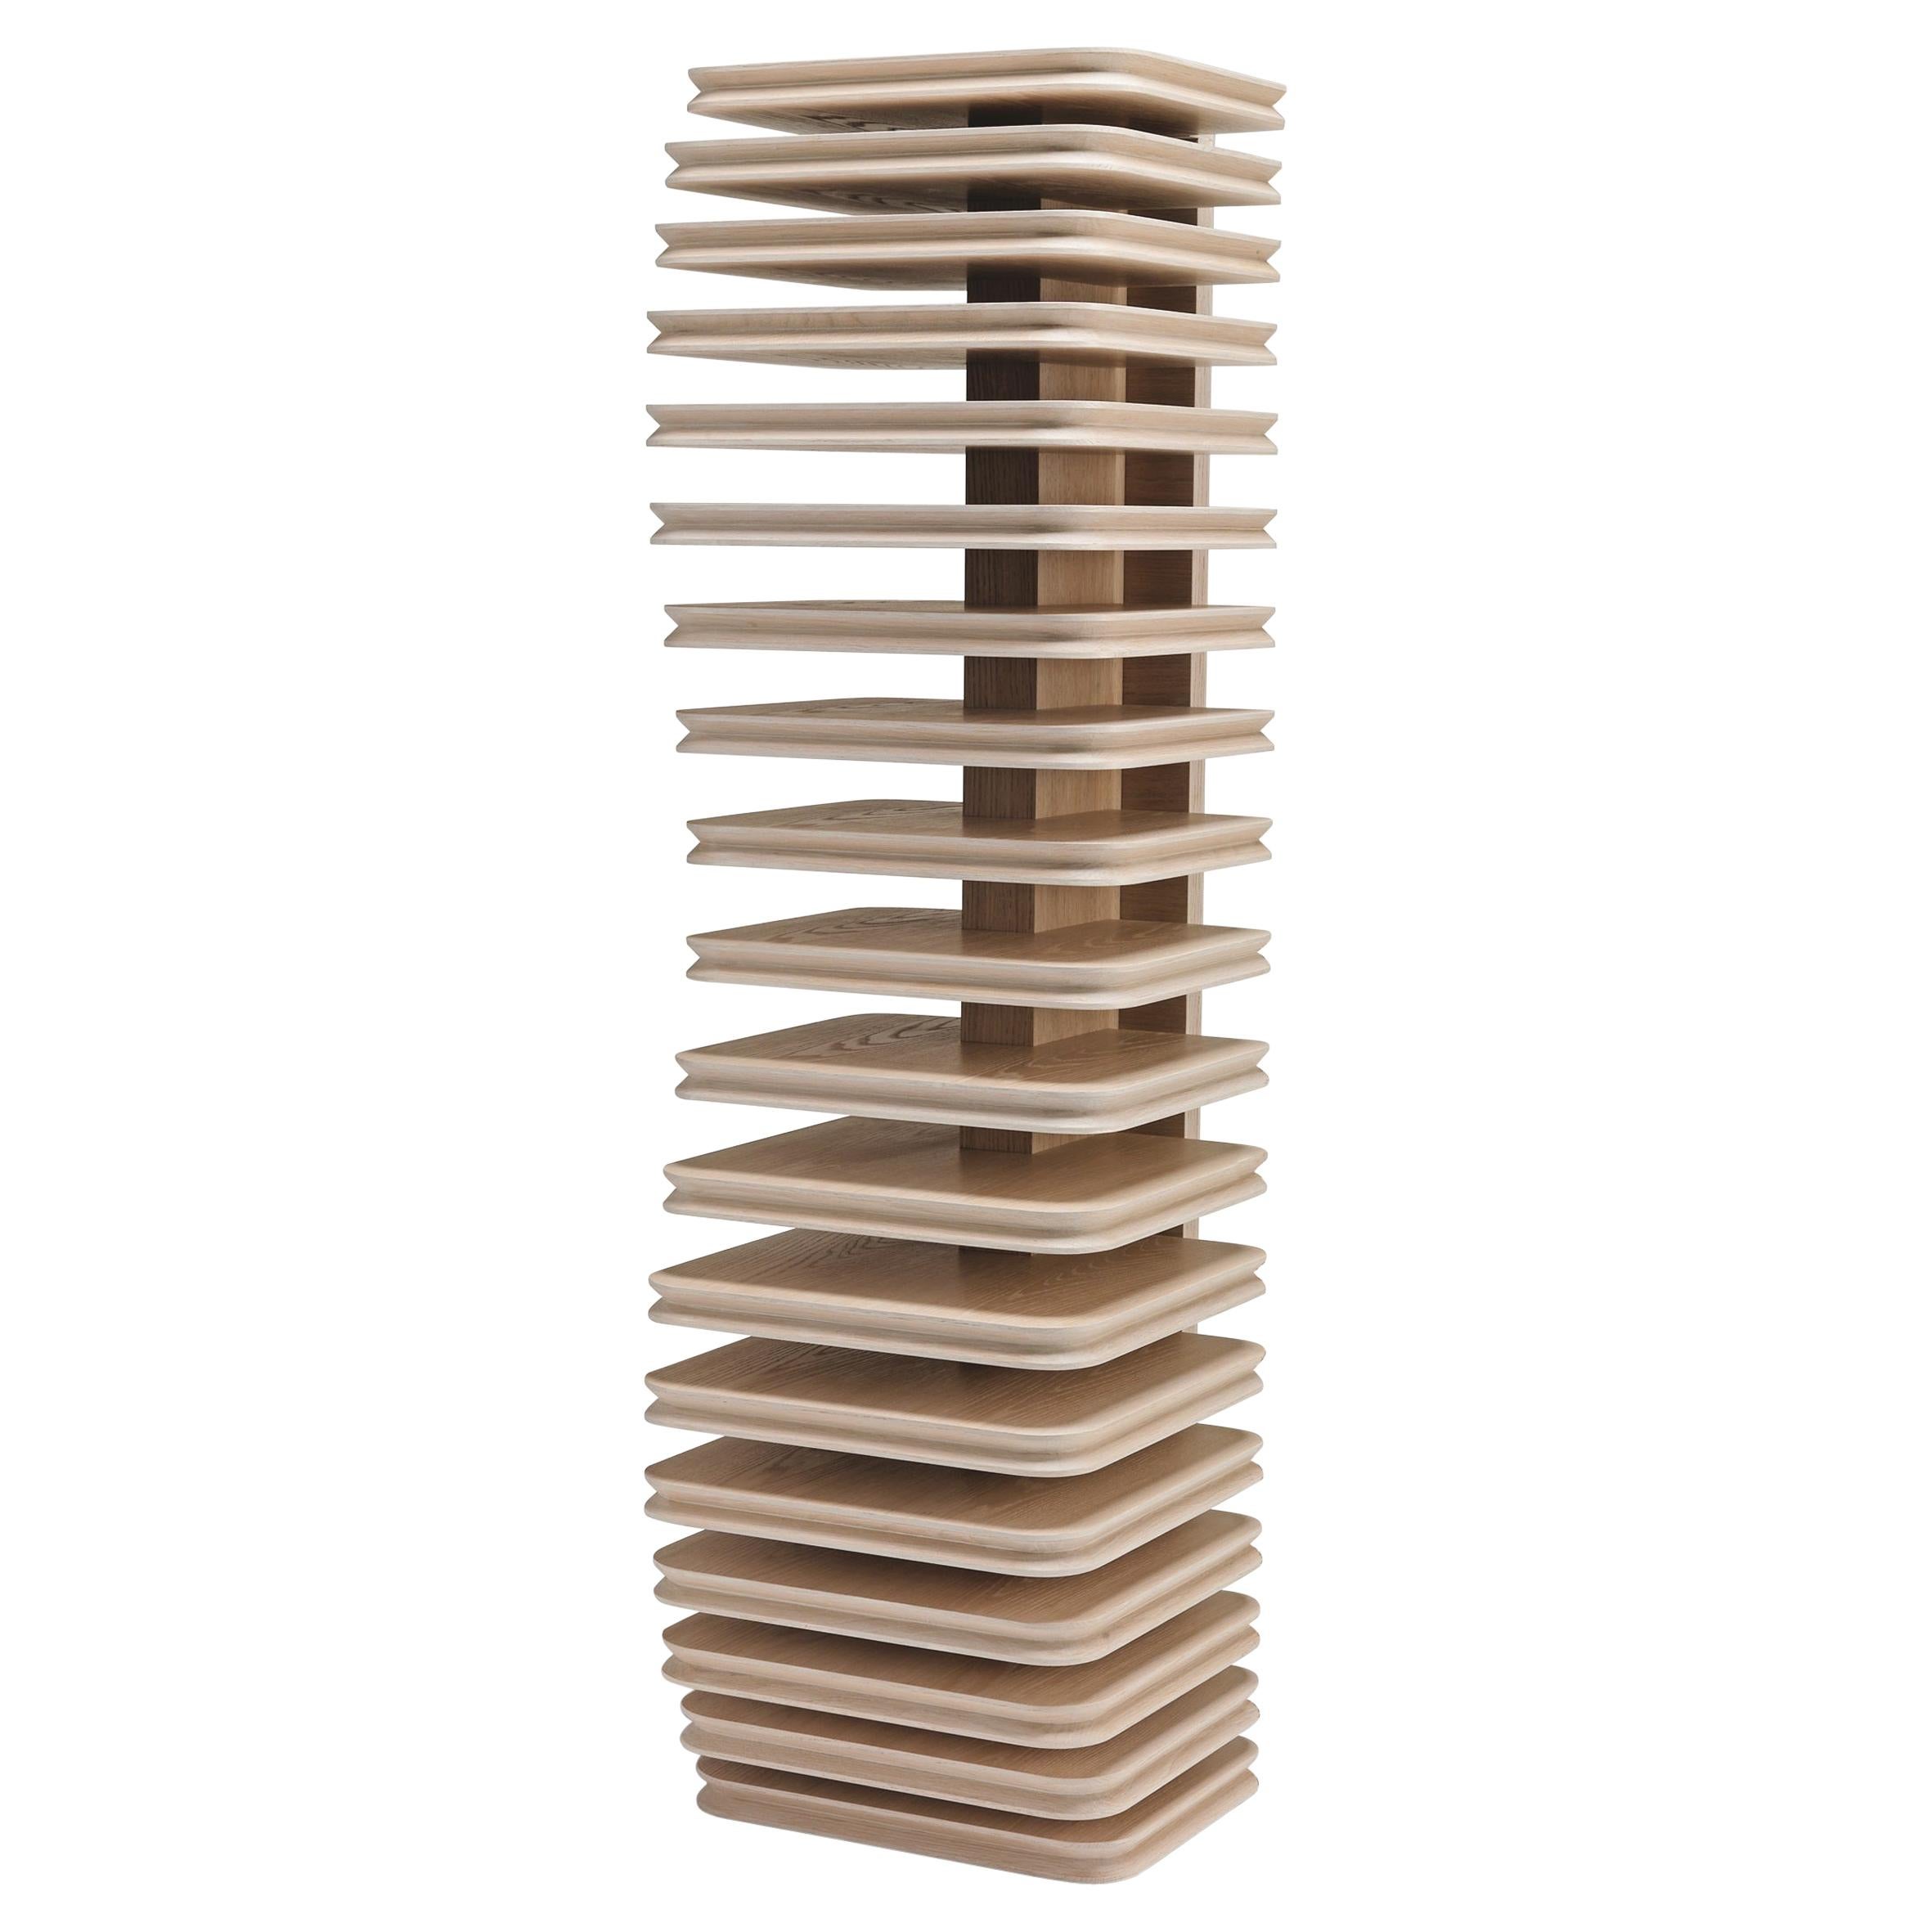 TREE OF KNOWLEDGE Freestanding Bookcase in Solid Oak Sanblasted by Piero Manara For Sale